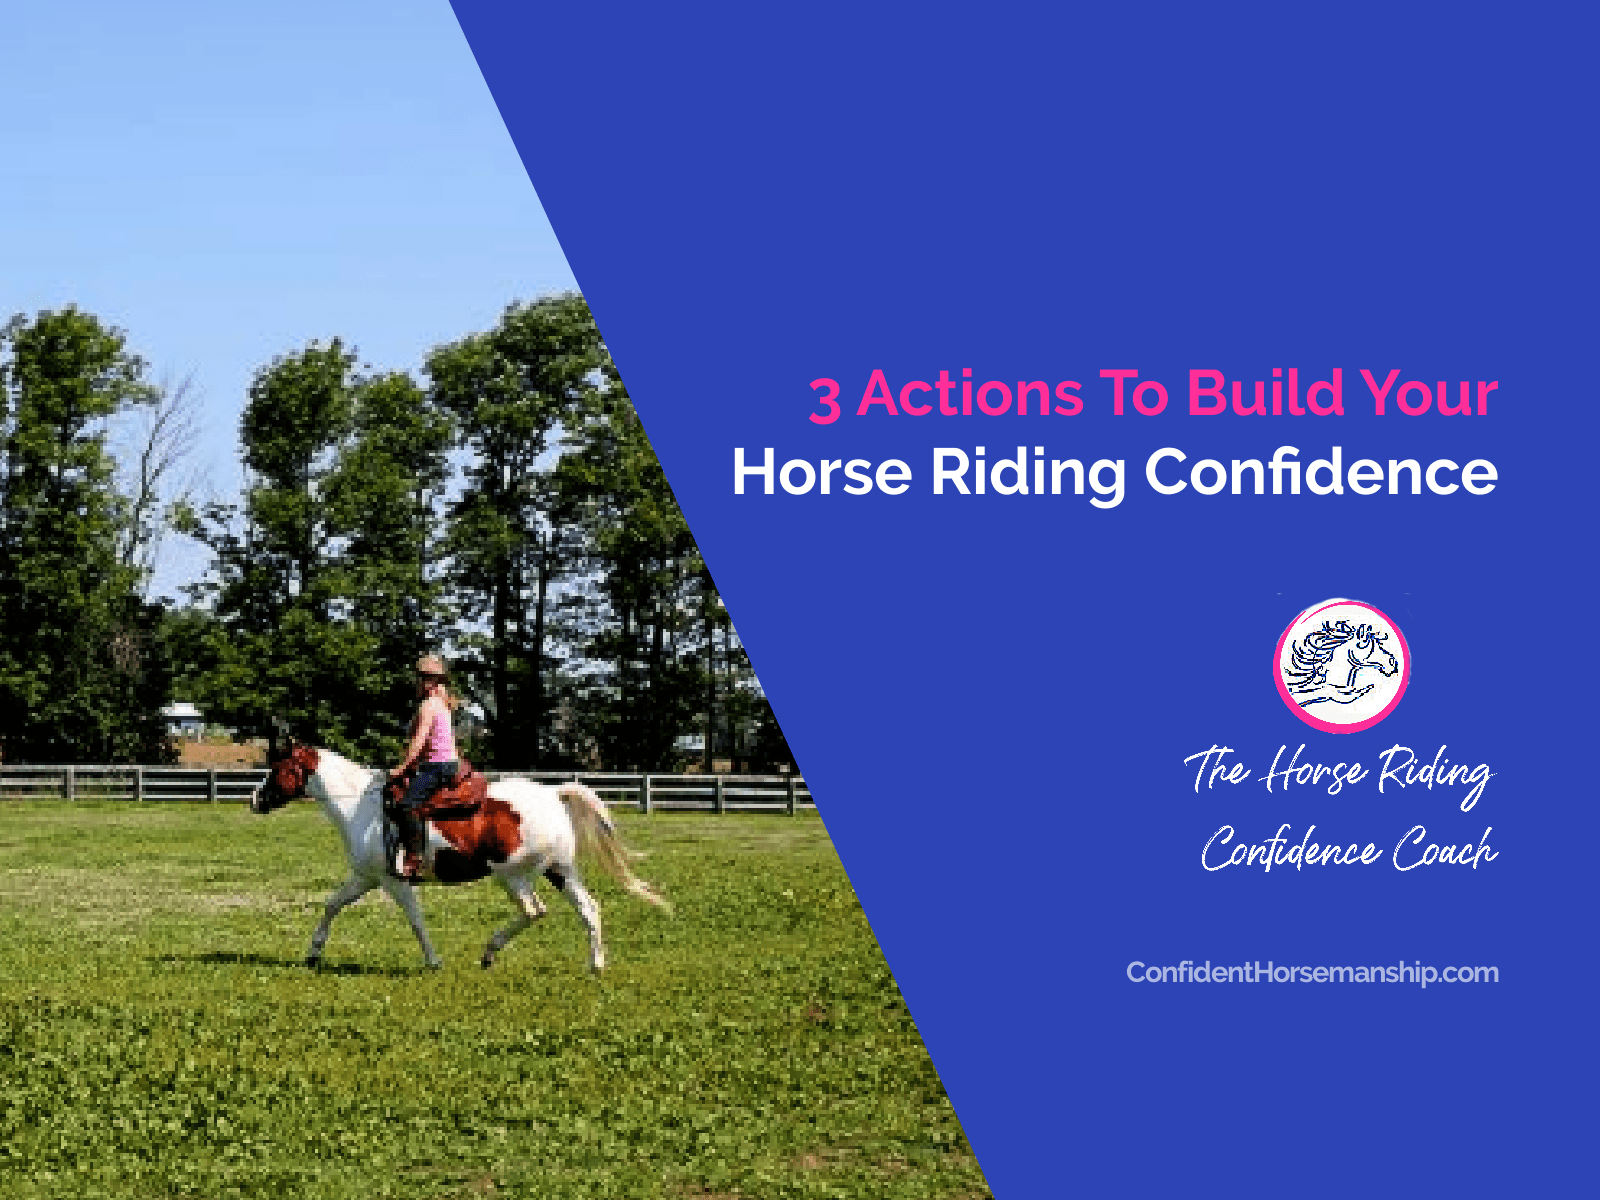 3 Actions To Build Your Horse Riding Confidence